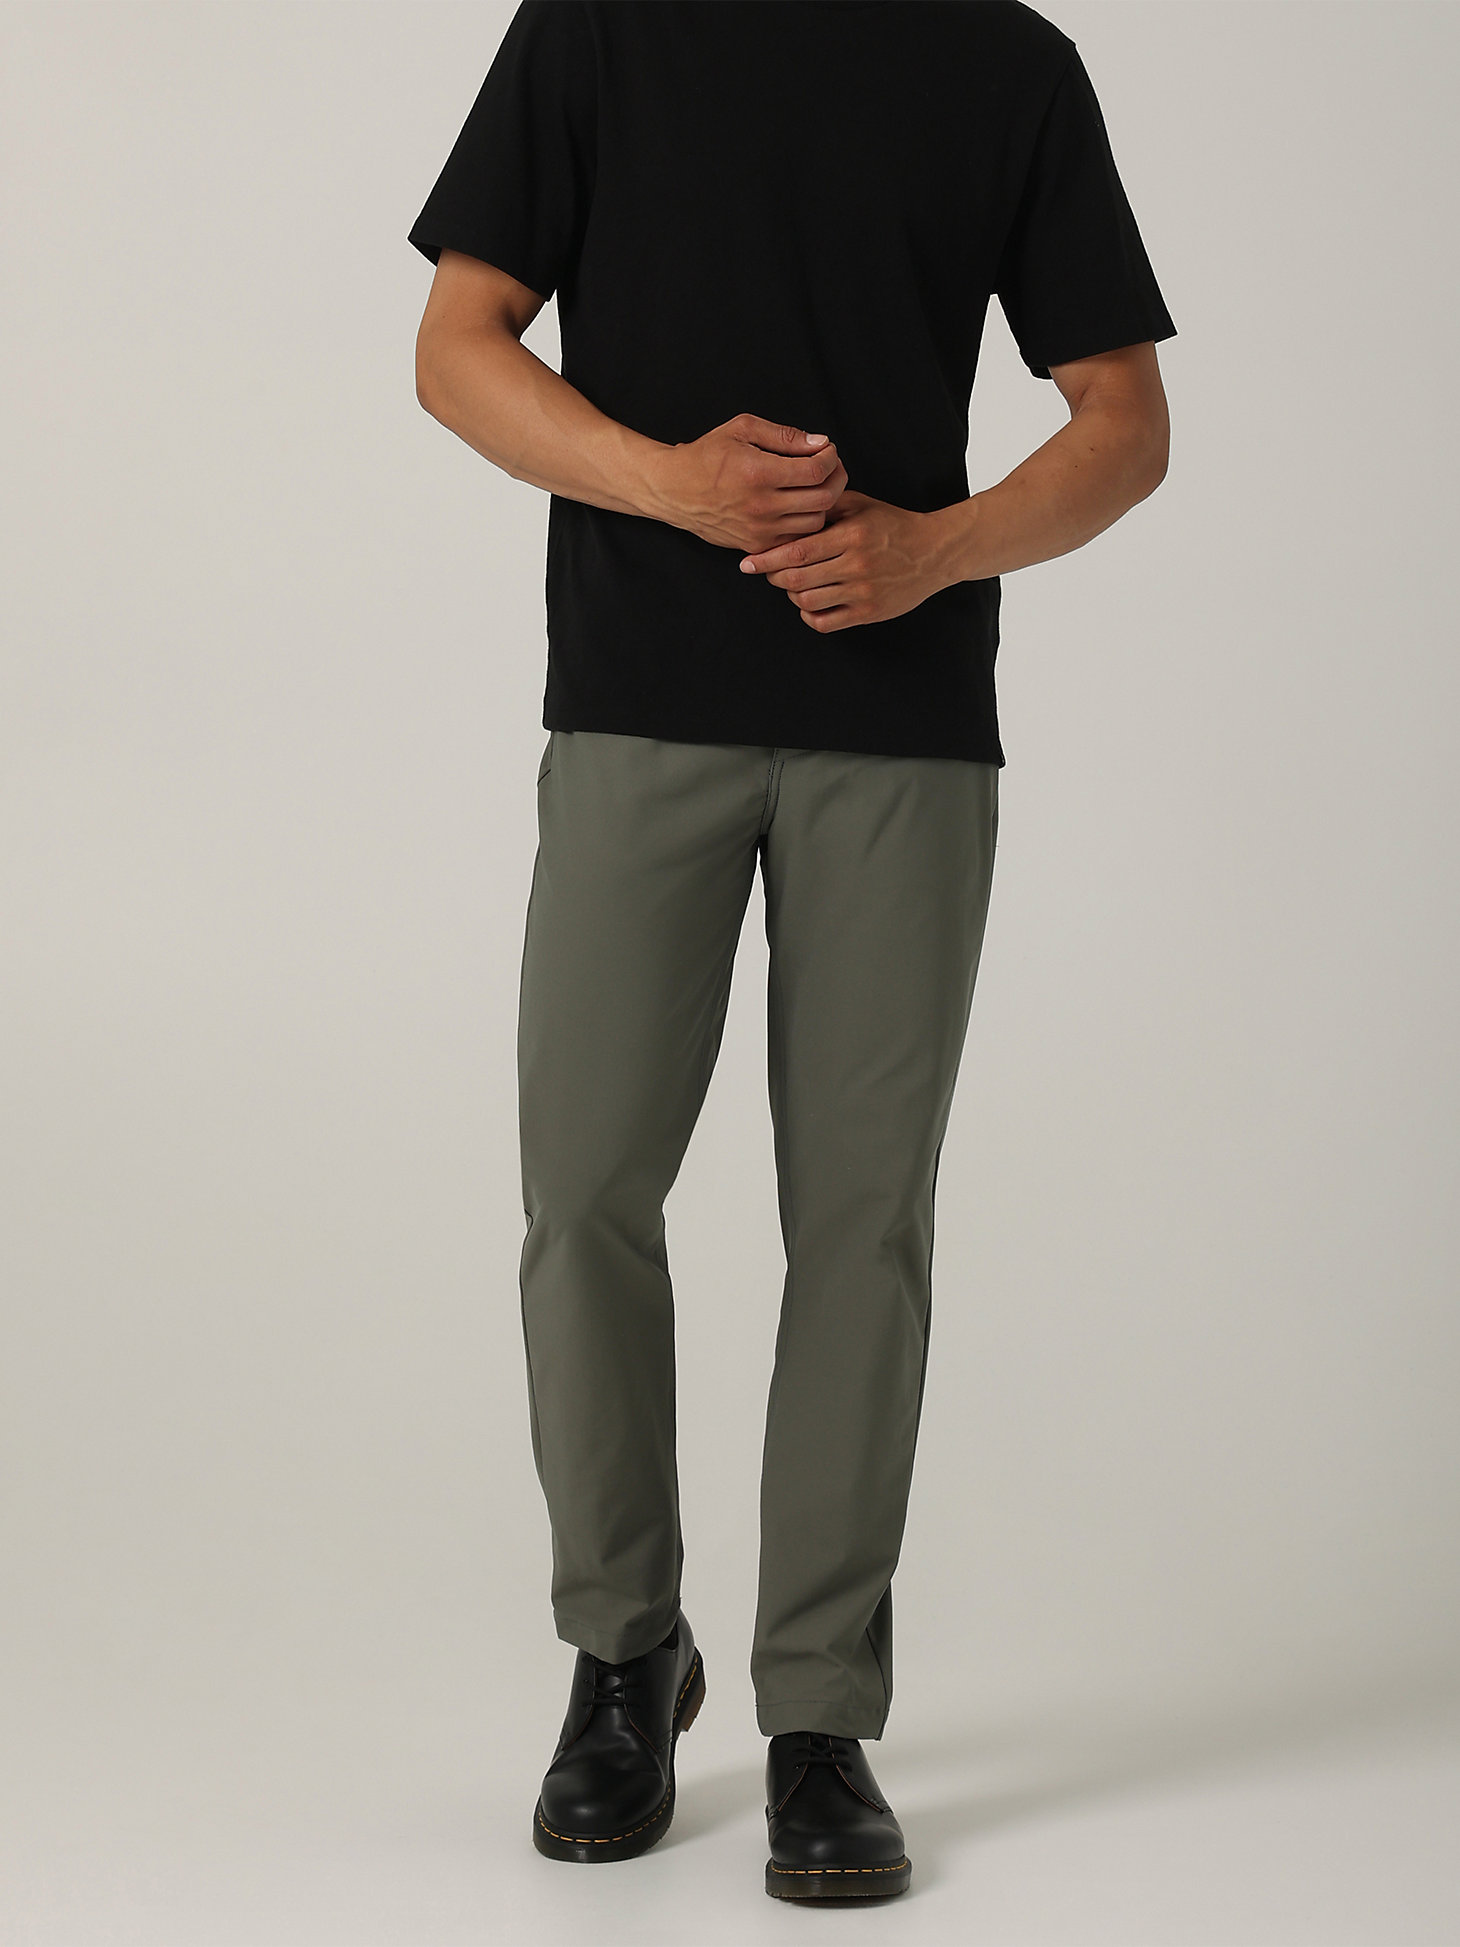 Men’s H.D. Maverick Relaxed Tapered Pant in Fort Green alternative view 7